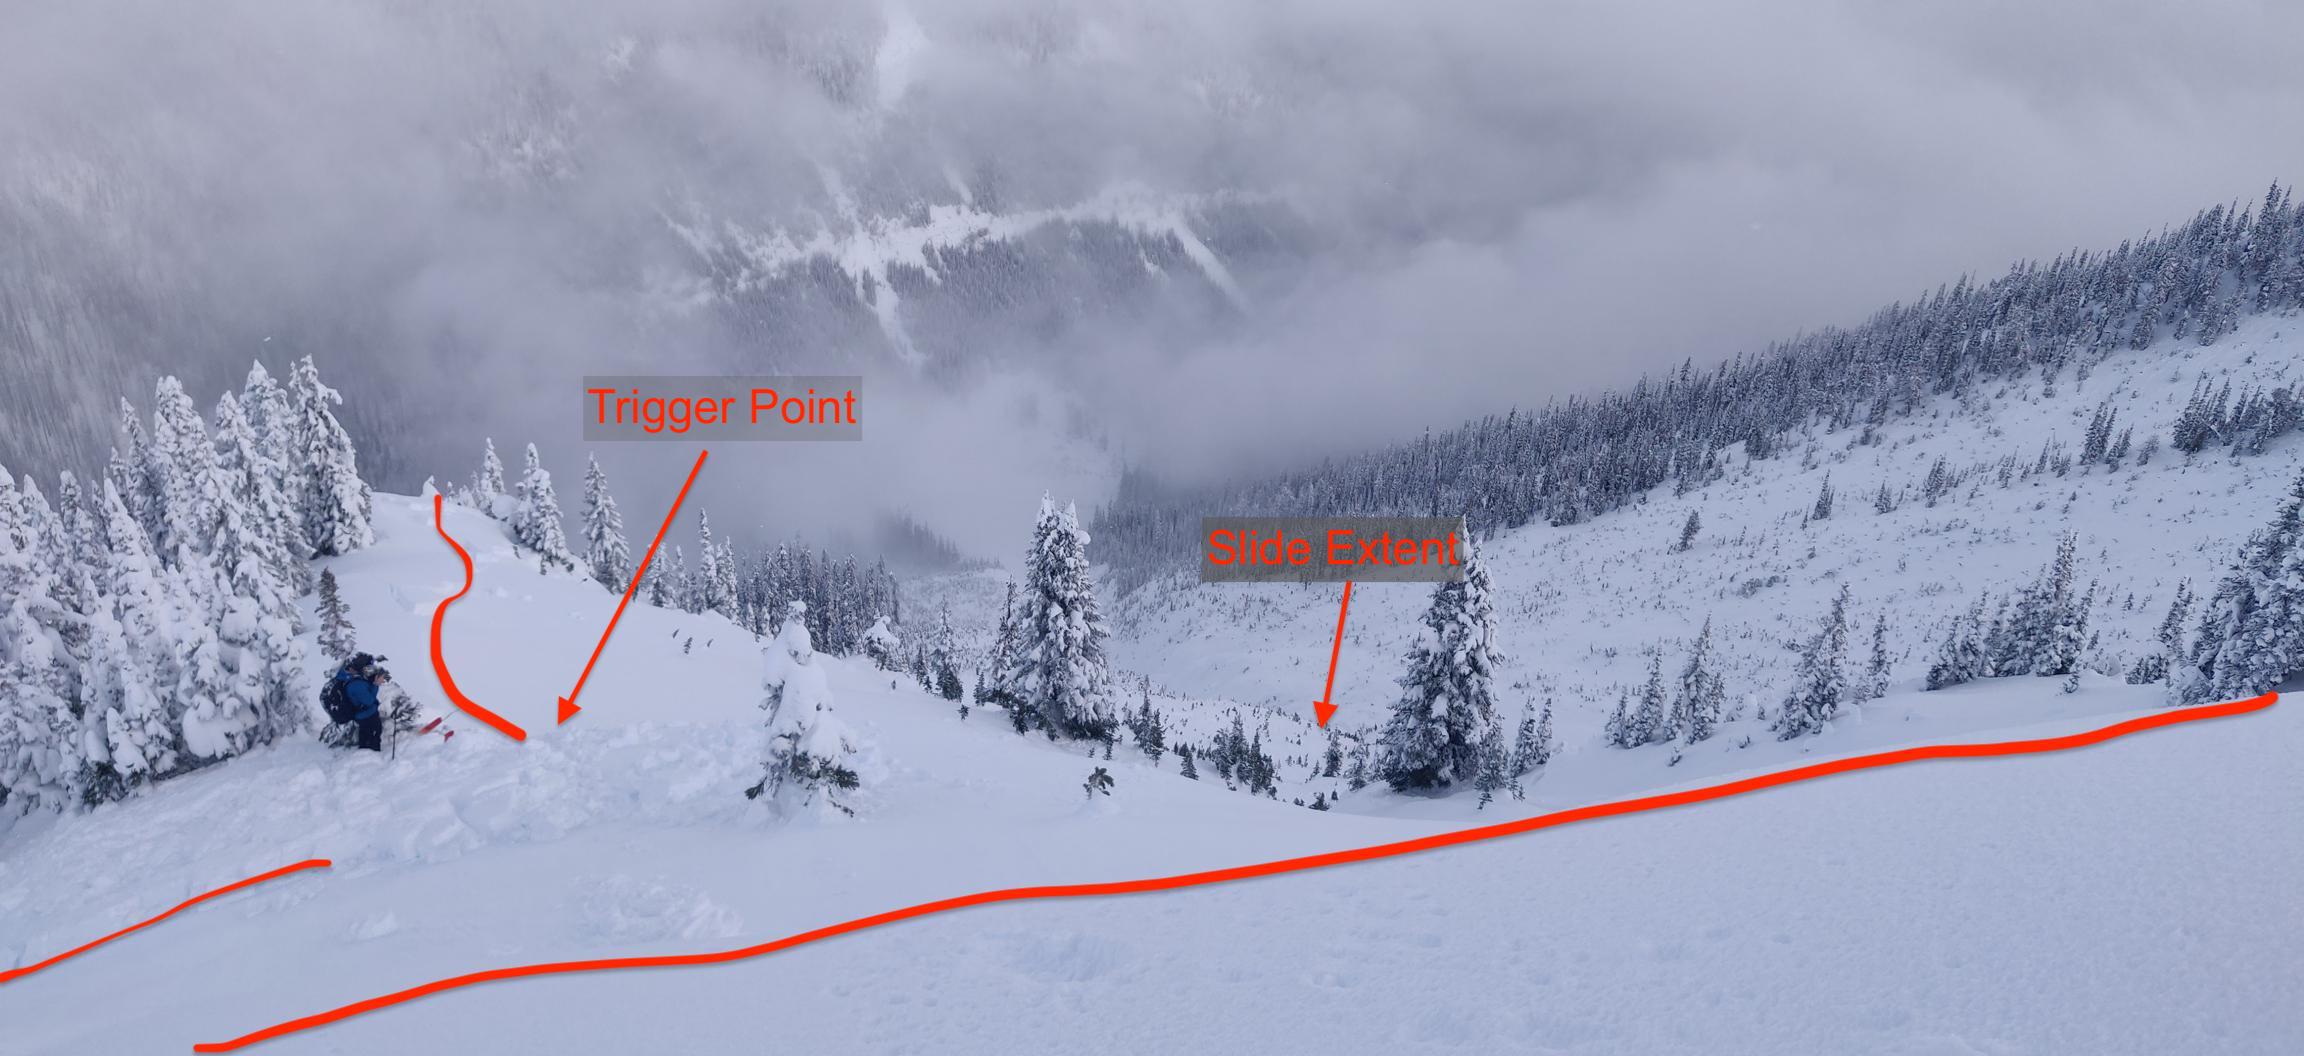 D1.5/D2, R3. Skier triggered as they descended the rollover onto the saddle. Skier was able to grab a tree although this may not have been necessary based on their position on the saddle. Note that the slide extent is probably 400-500 vertical feet down the slope.